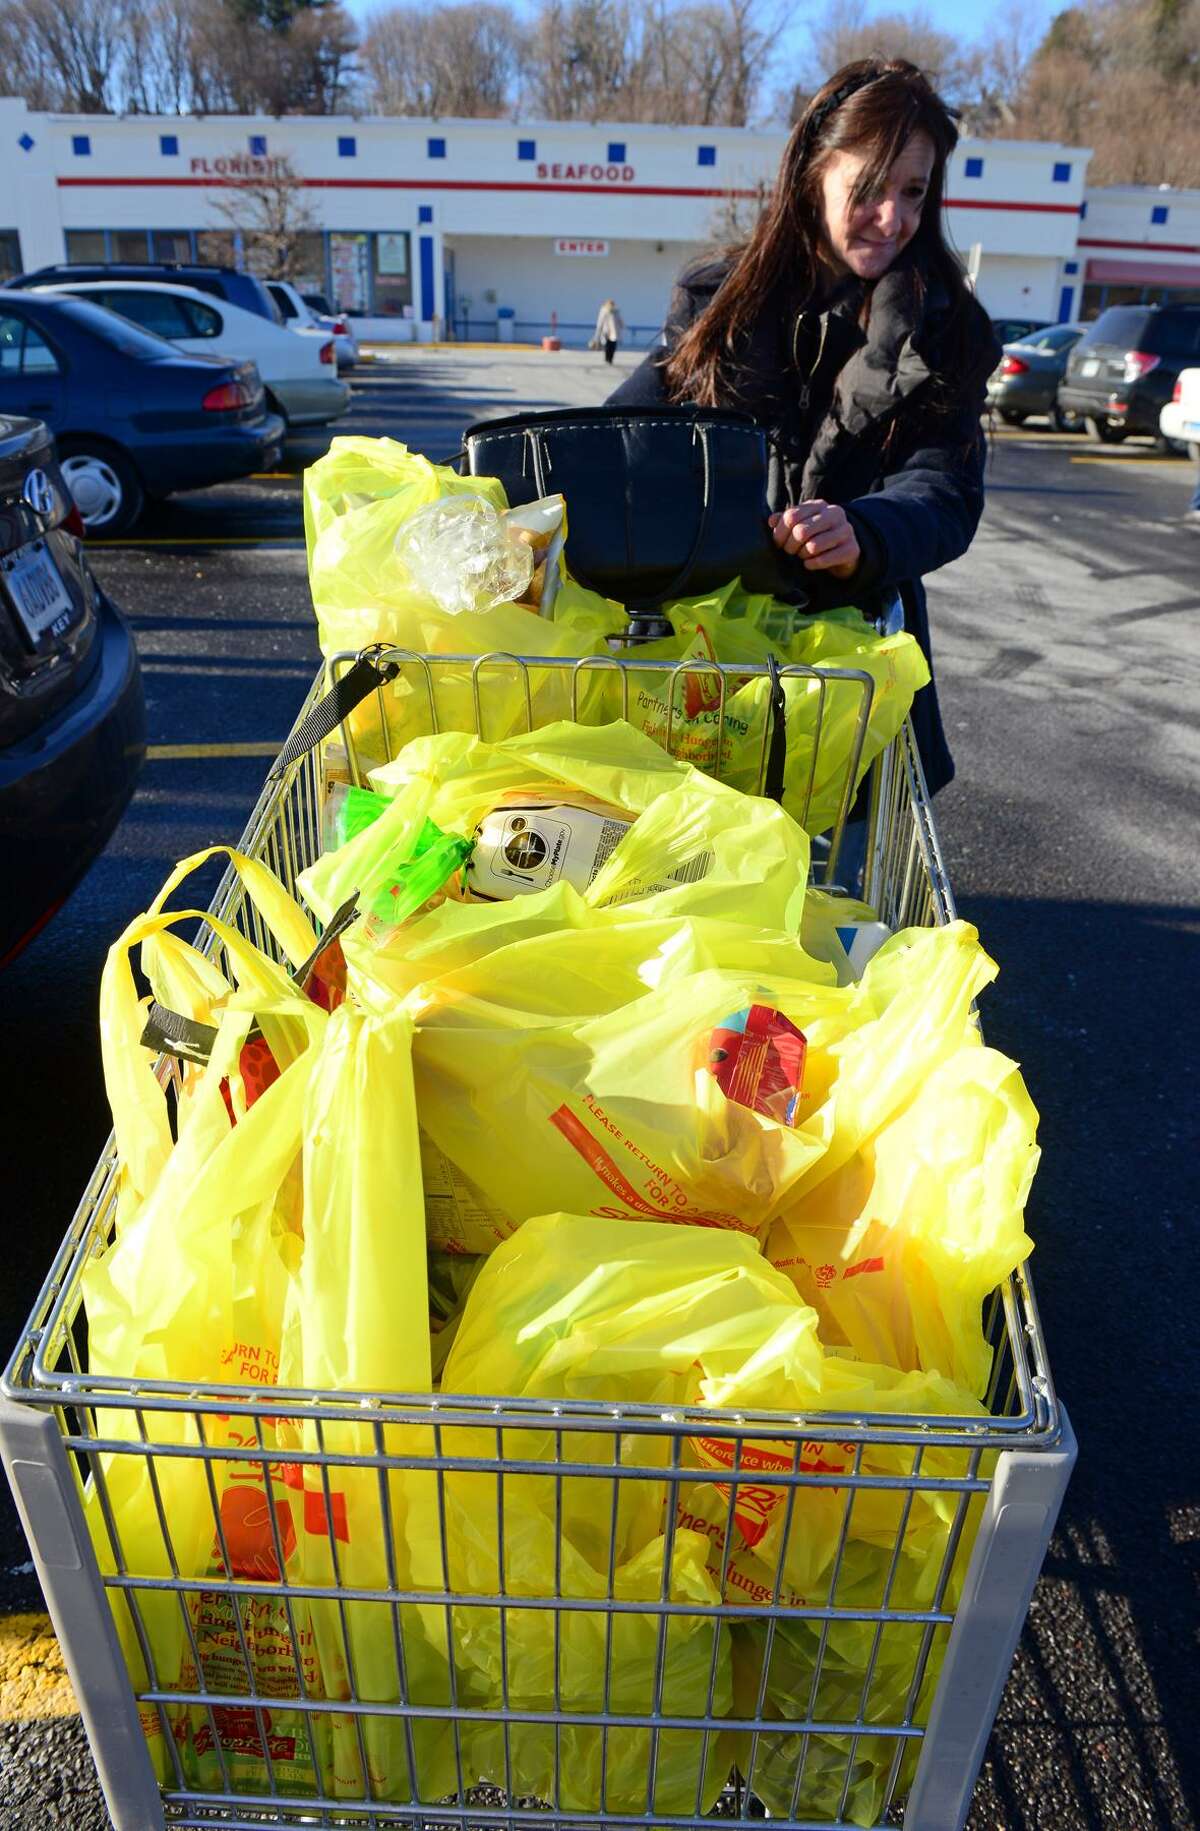 Any business that doesn’t adhere to Middletown’s new plastic bag ordinance will be given a warning. If it doesn’t comply, the city will assess a $45 fine. While plastic checkout bags won’t be provided, groceries and other merchants can provide paper bags for a $.10 fee. Middletown Recycling Coordinator Kim O’Rourke said even paper presents its own environmental issues.